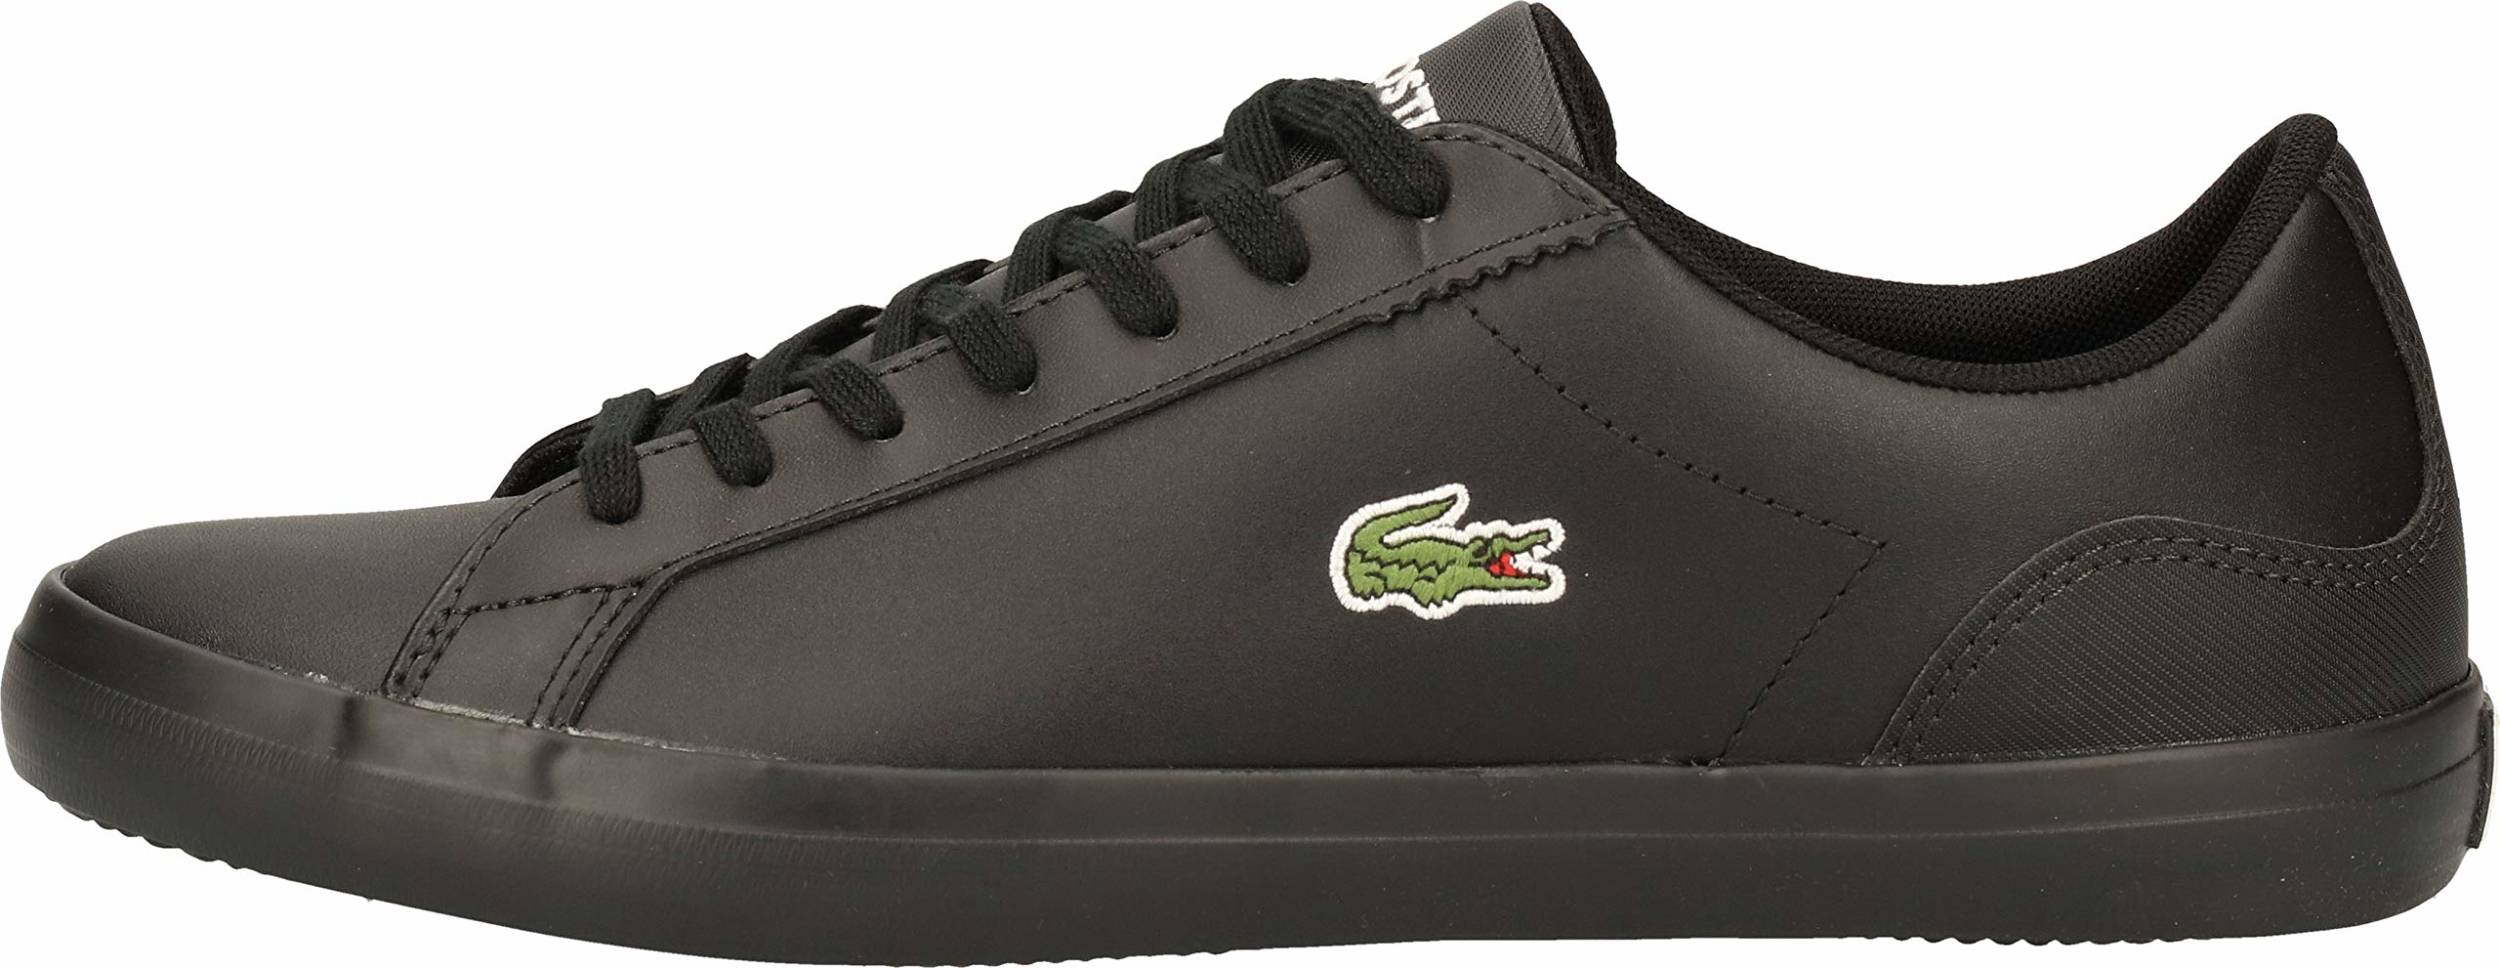 new lacoste trainers